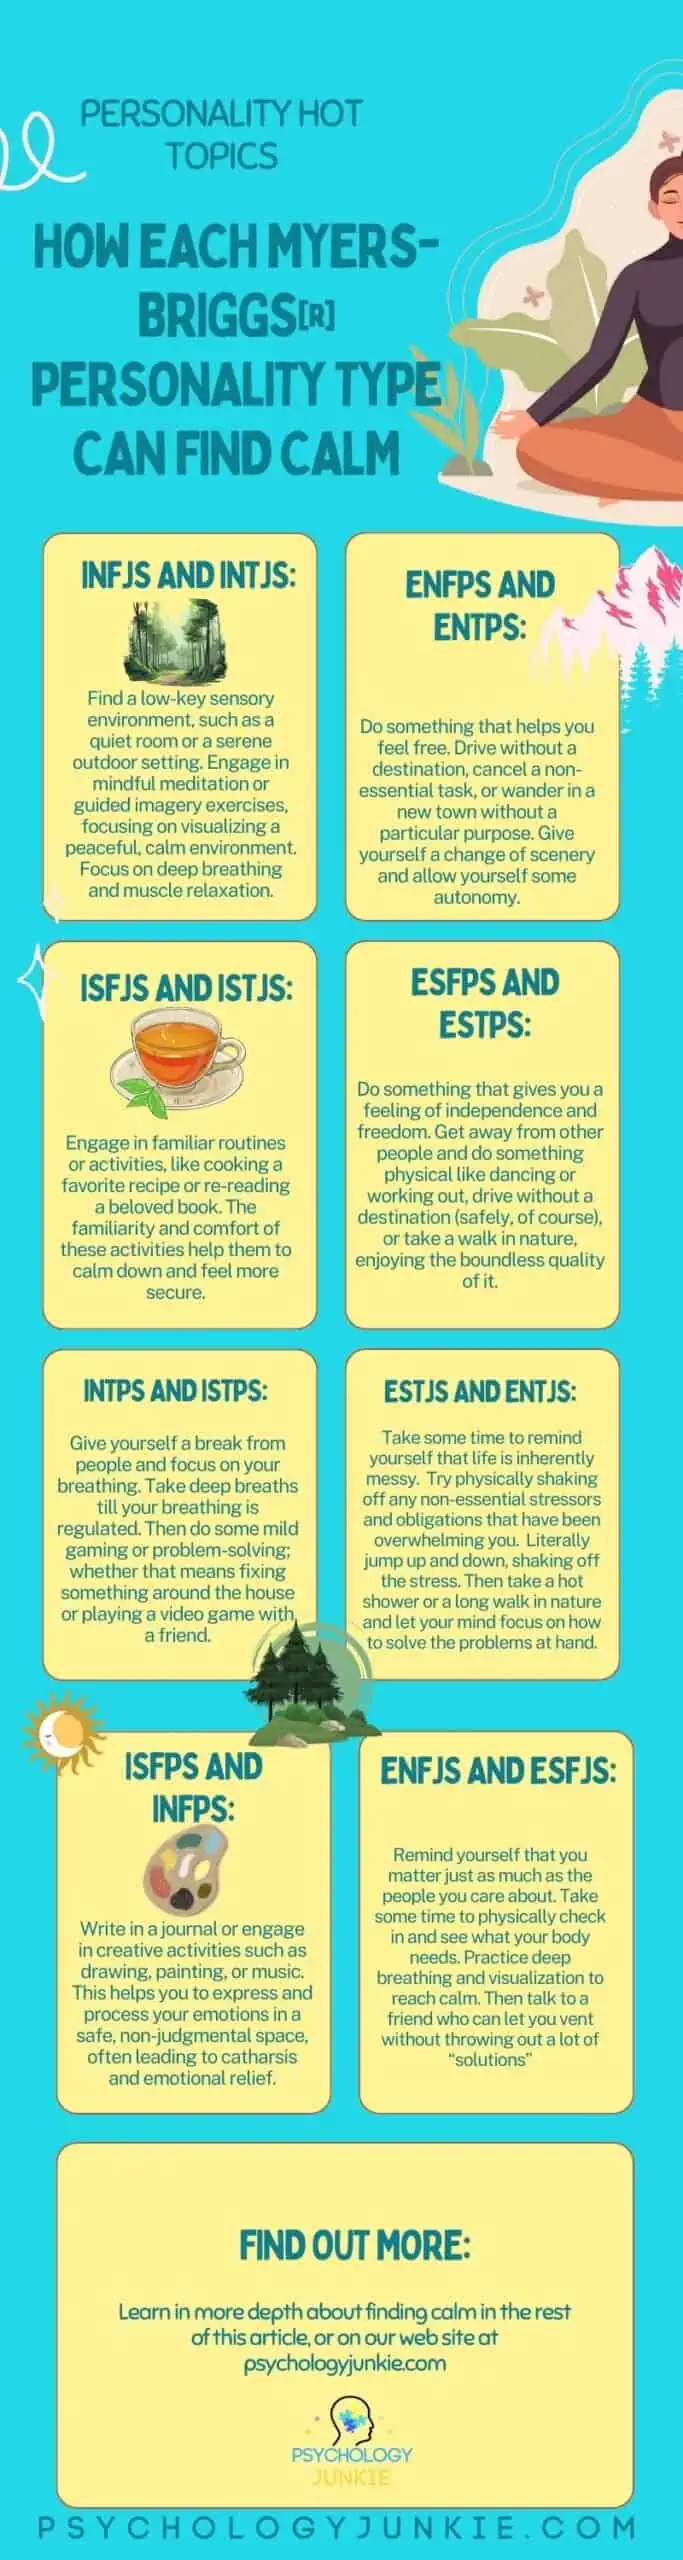 How to find calm, based on your Myers-Briggs® personality type. #MBTI #Personality #infographic